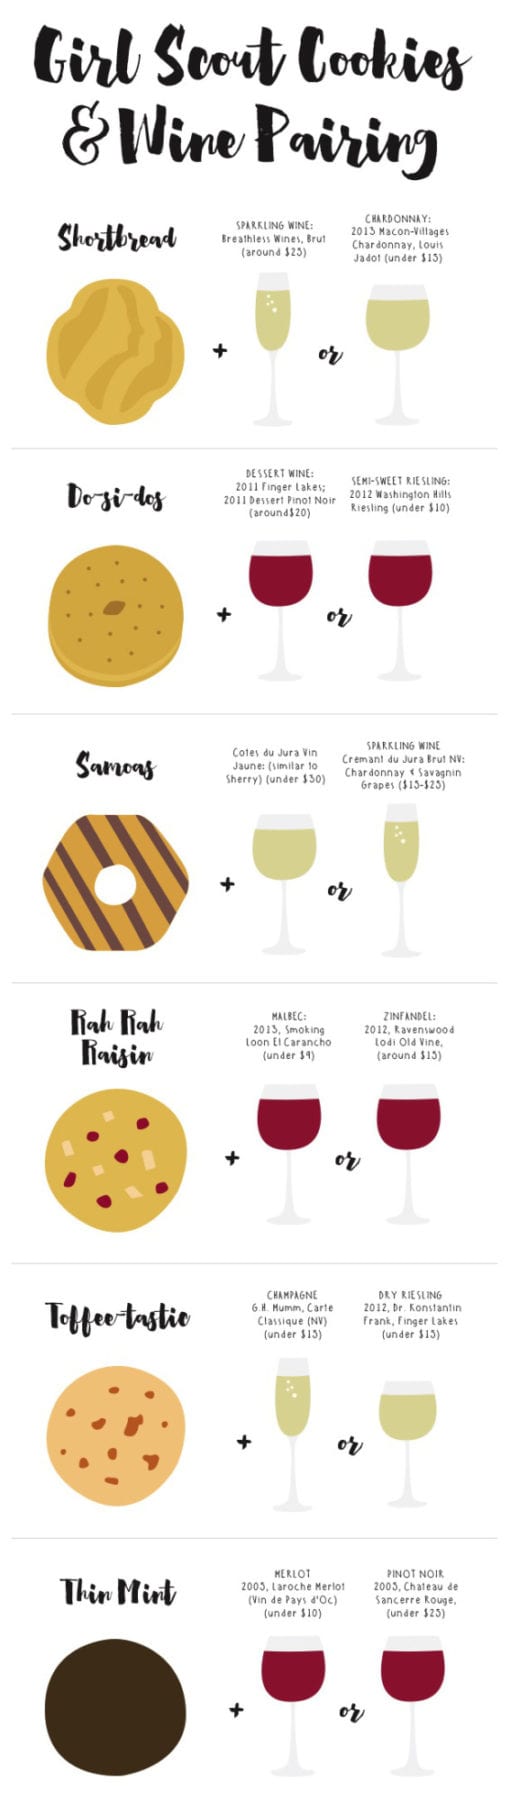 How to Pair Wine and Girl Scout Cookies